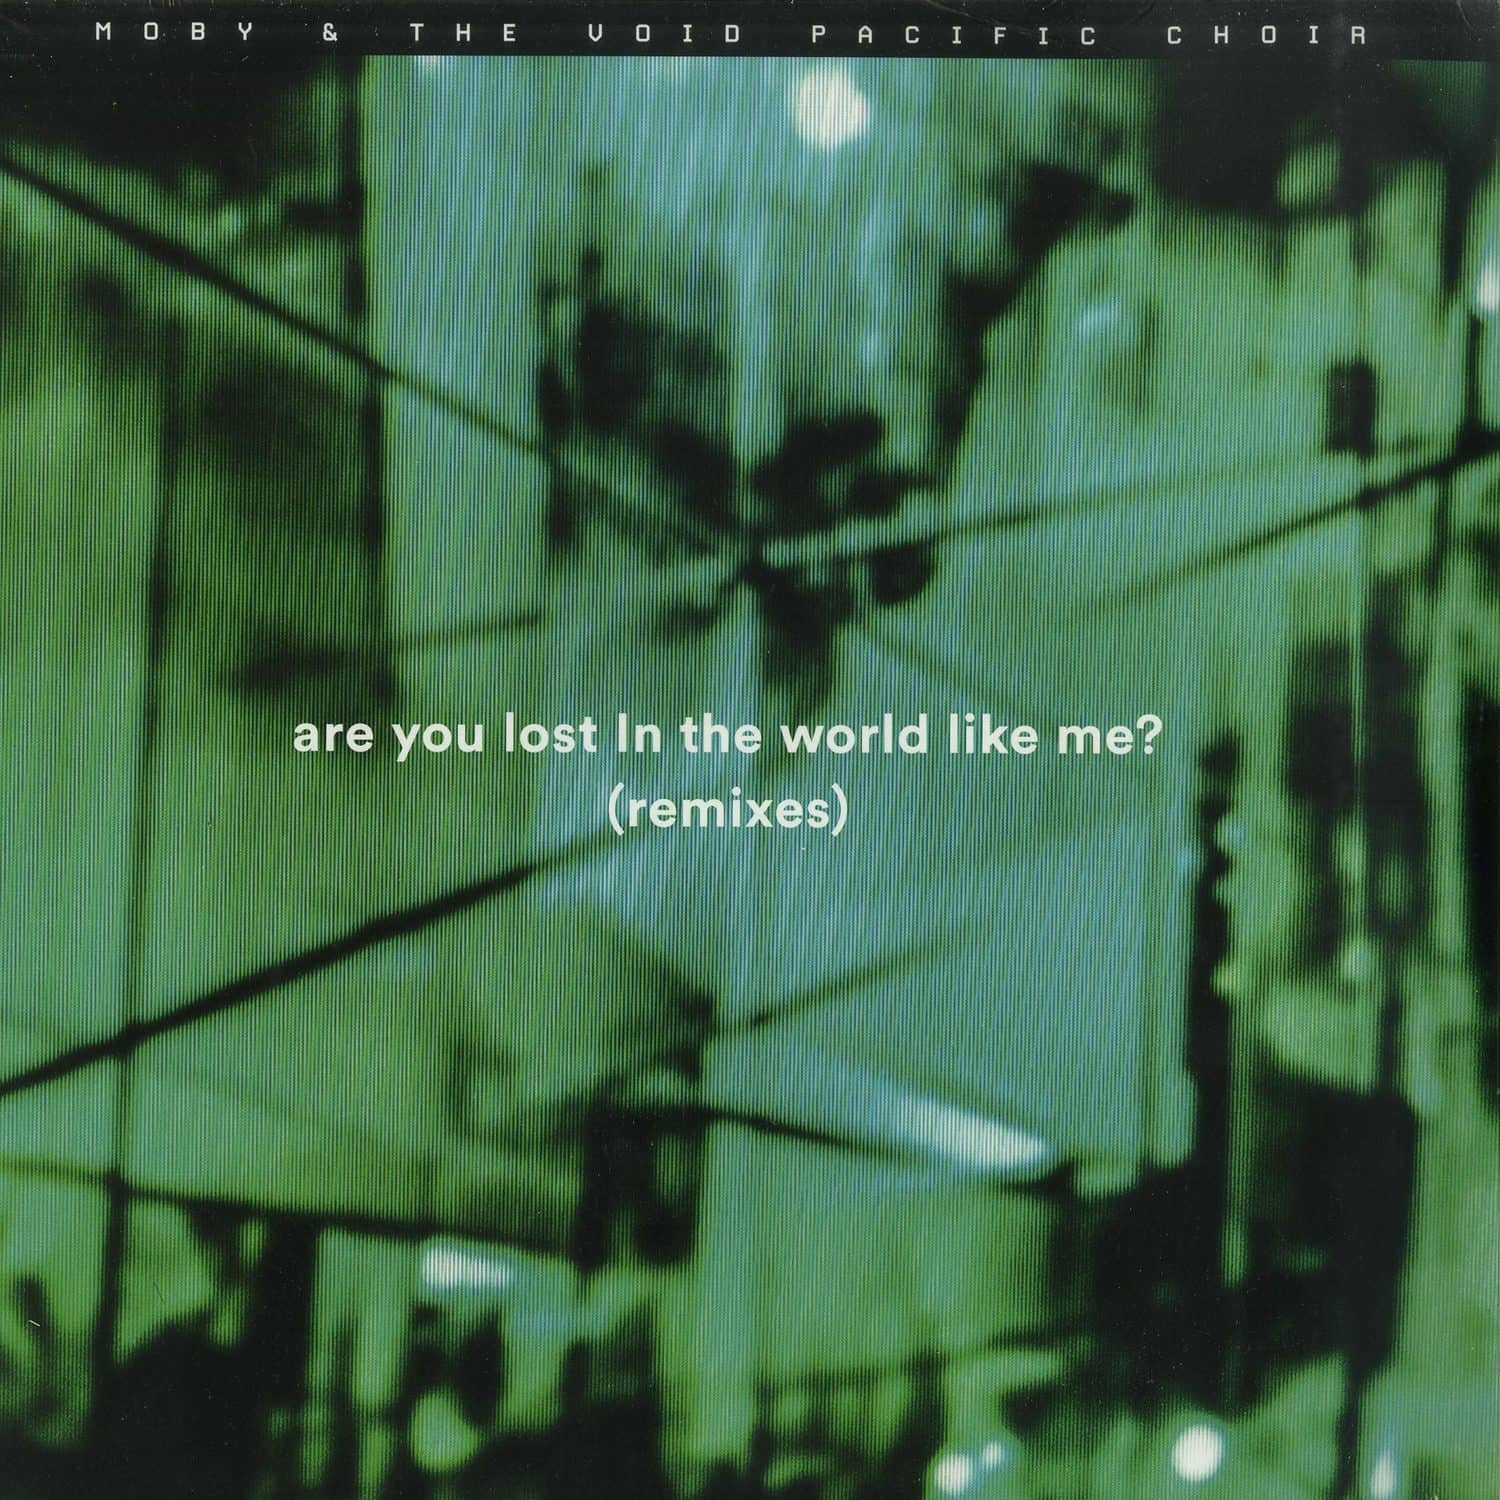 Moby & The Void Pacific Choir - ARE YOU LOST IN THE WORLD LIKE ME? 